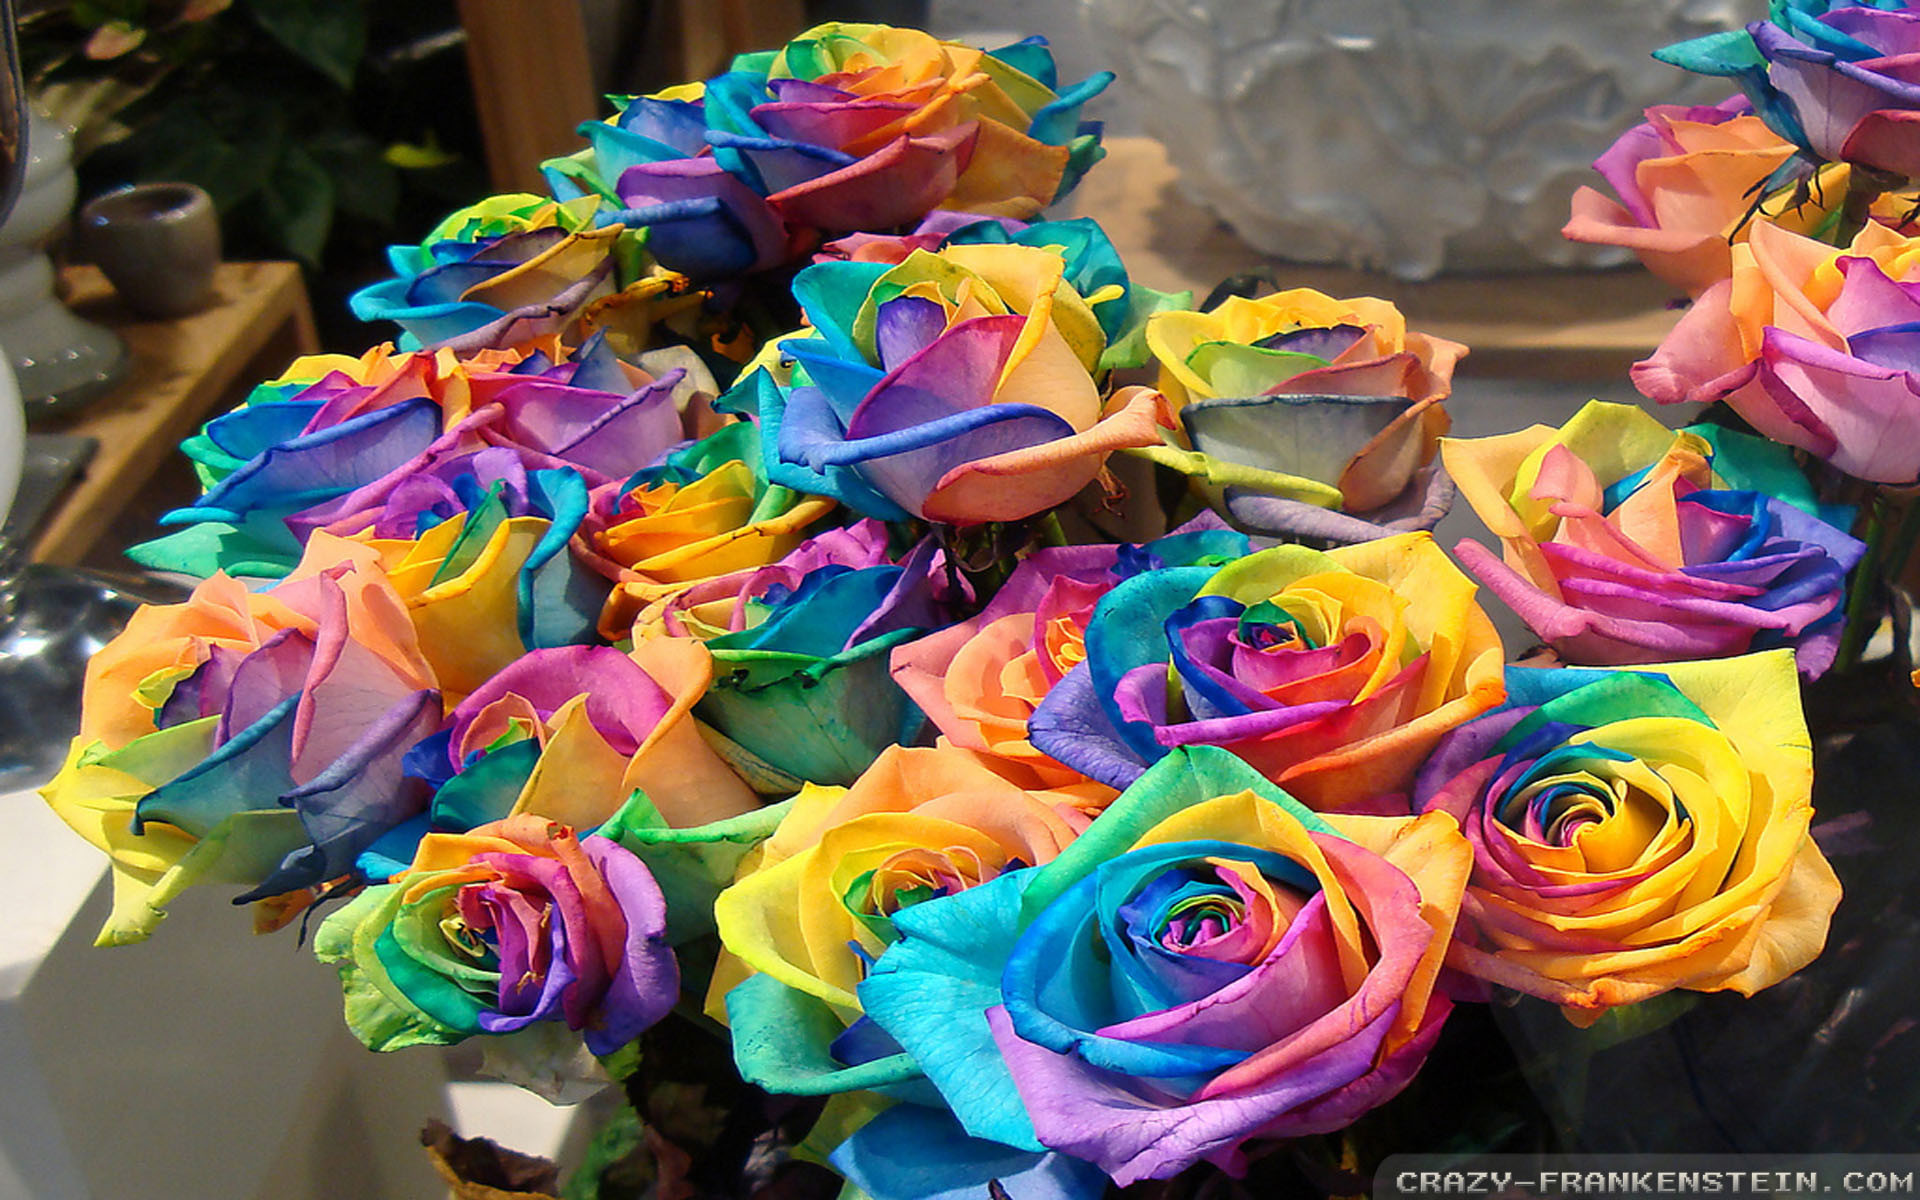 Rainbow Roses Background ·① Wallpapertag